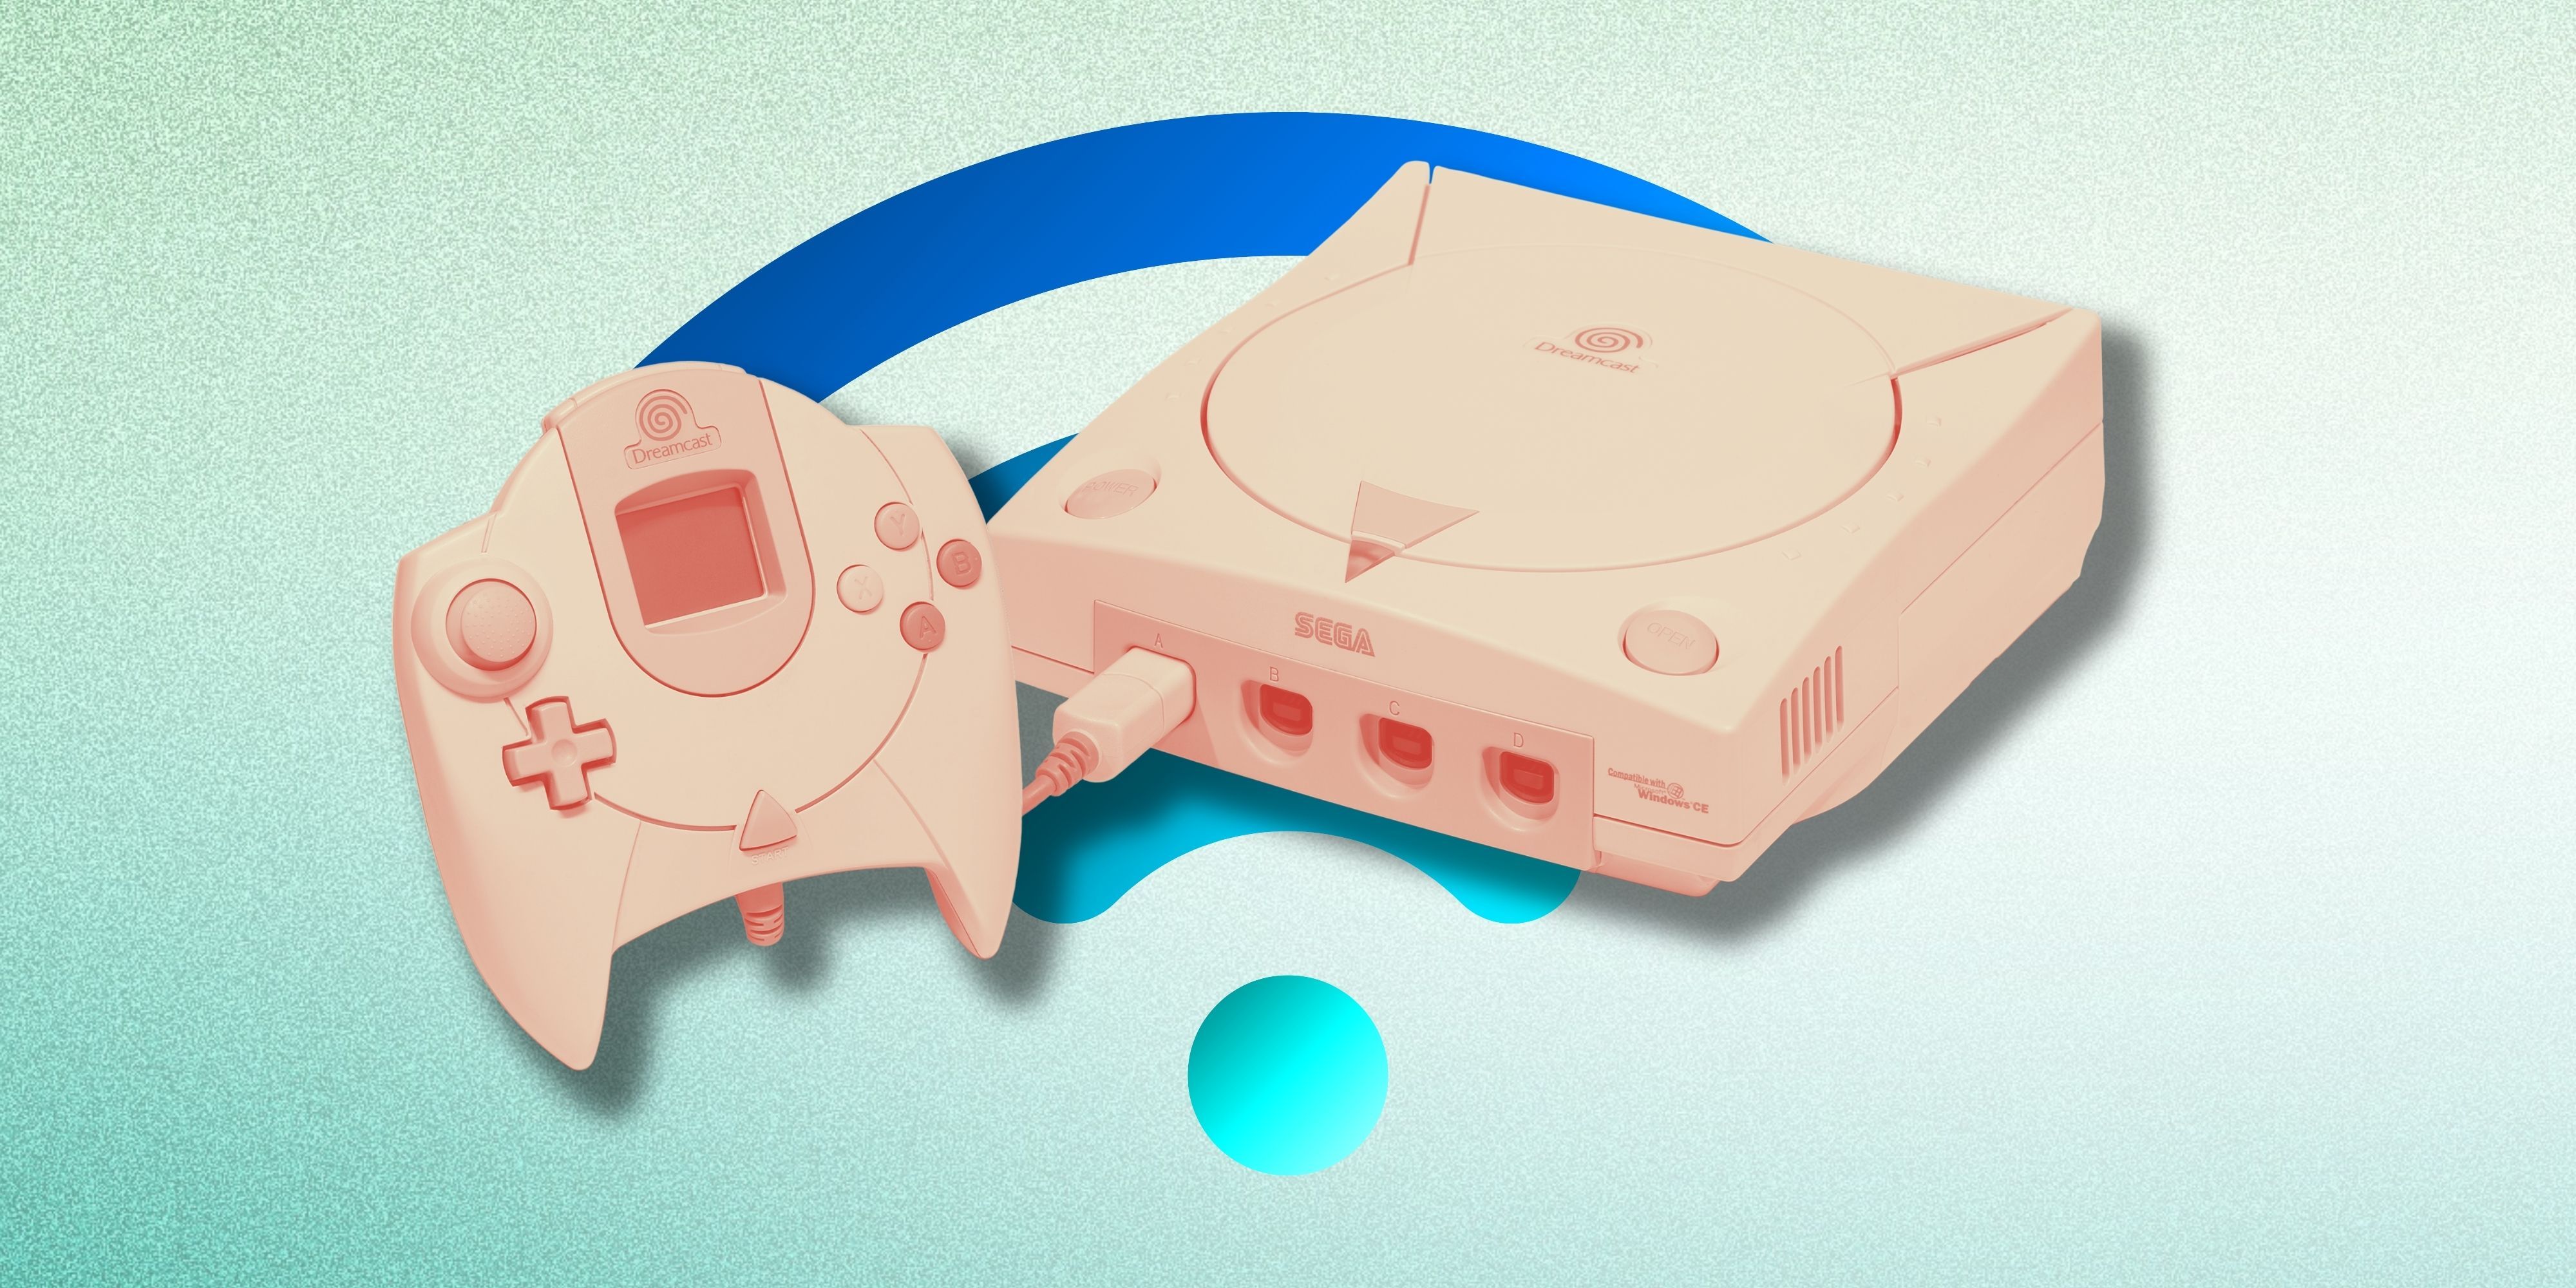 Dreamcast with WiFi symbol behind it